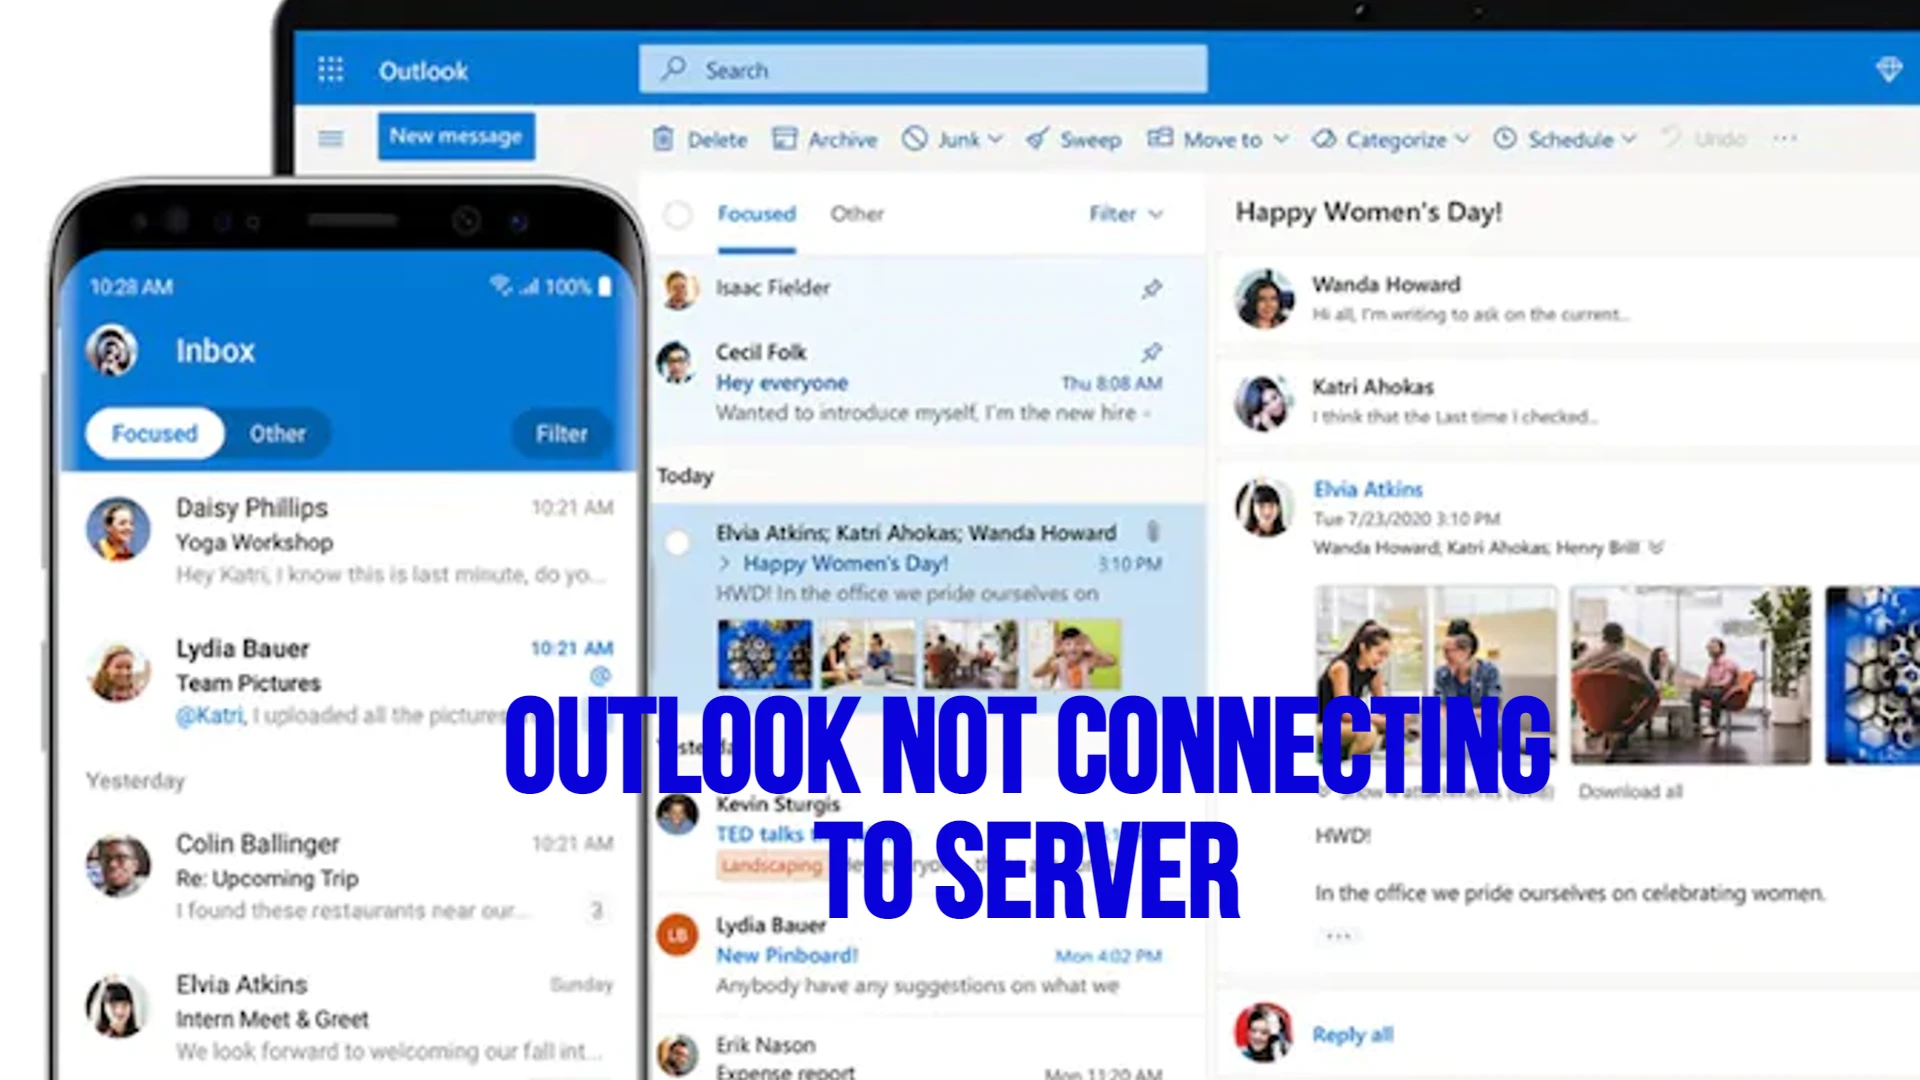 How to fix Outlook not connecting to the server on a Windows computer